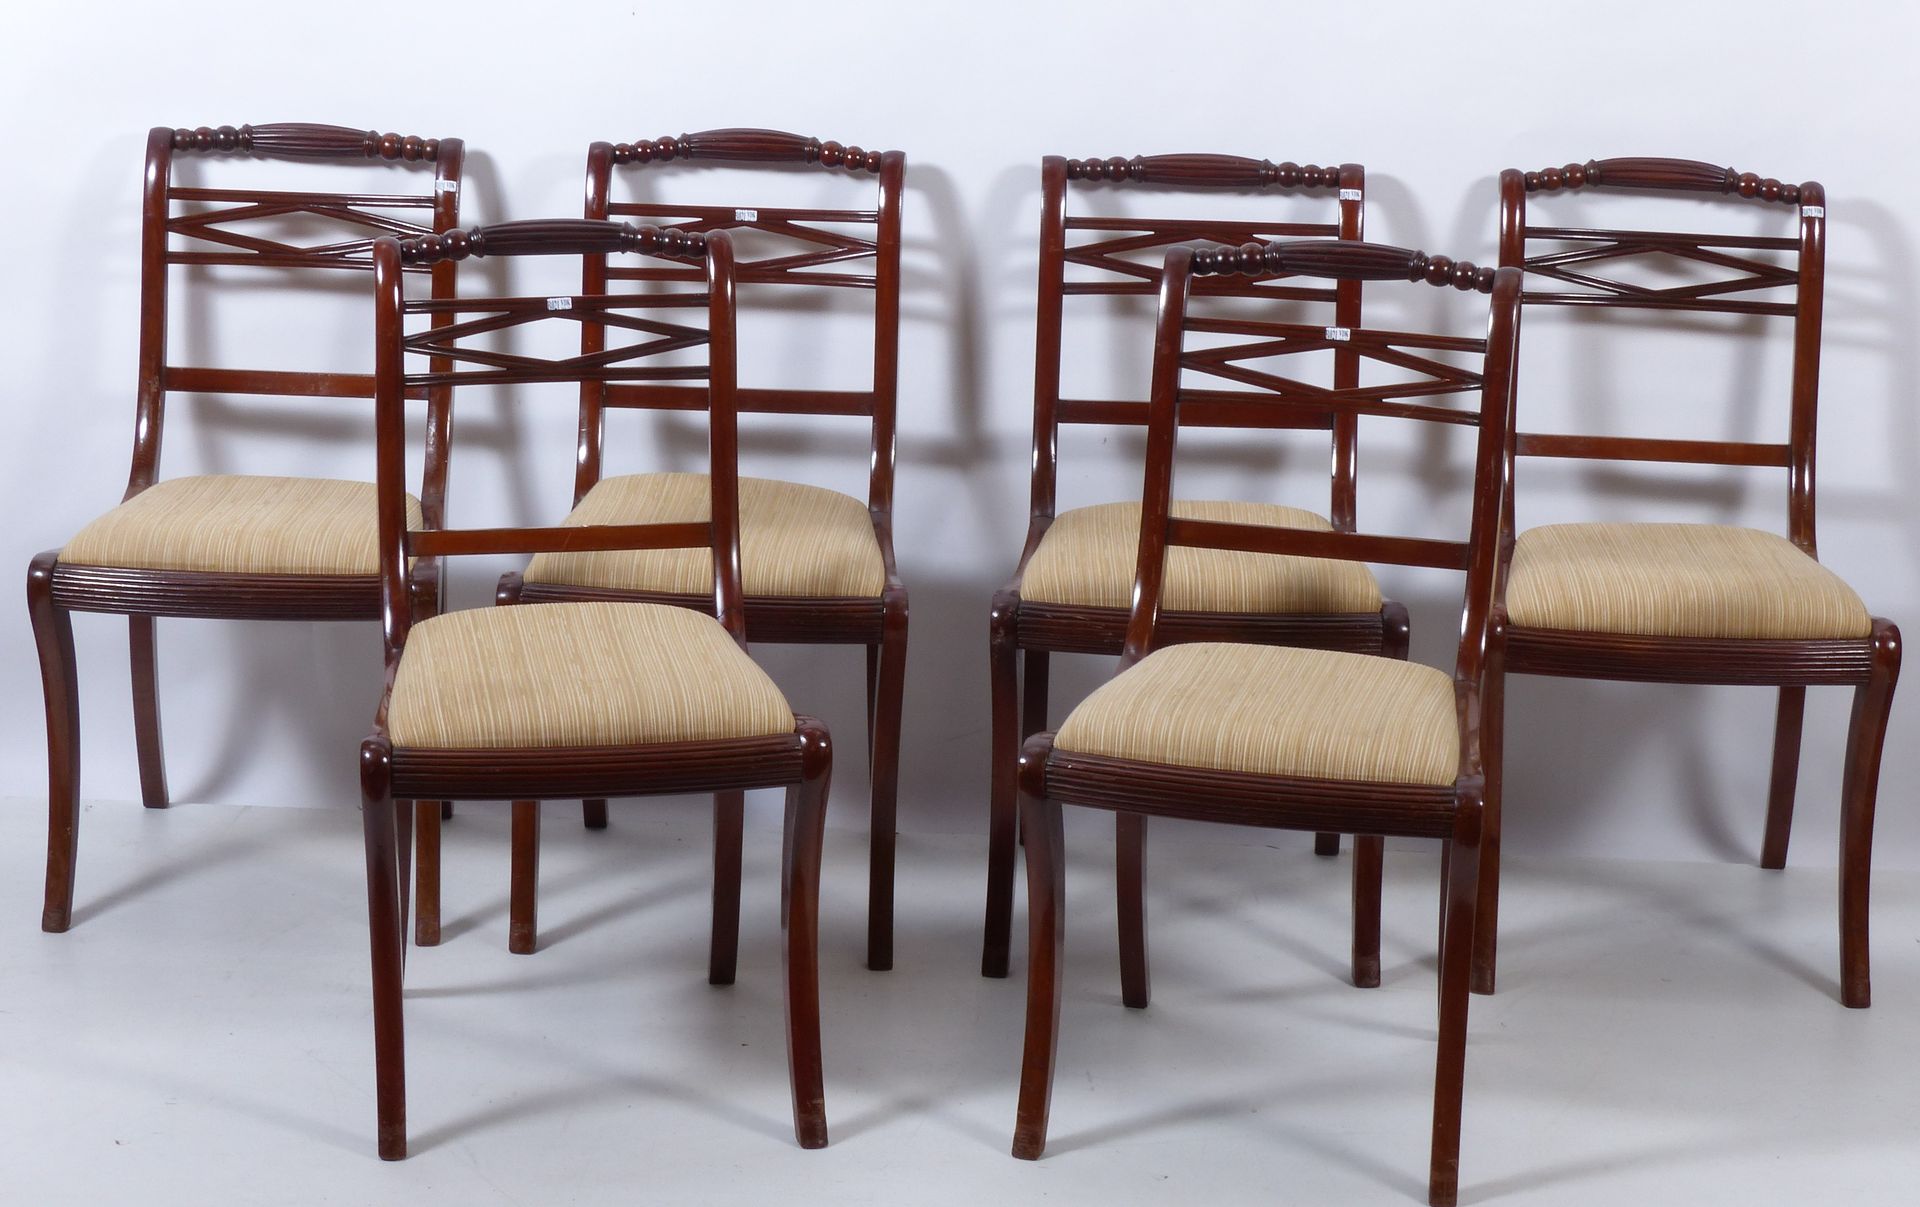 Null A set of 6 chairs in mahogany. English work. Period: XIXth century.